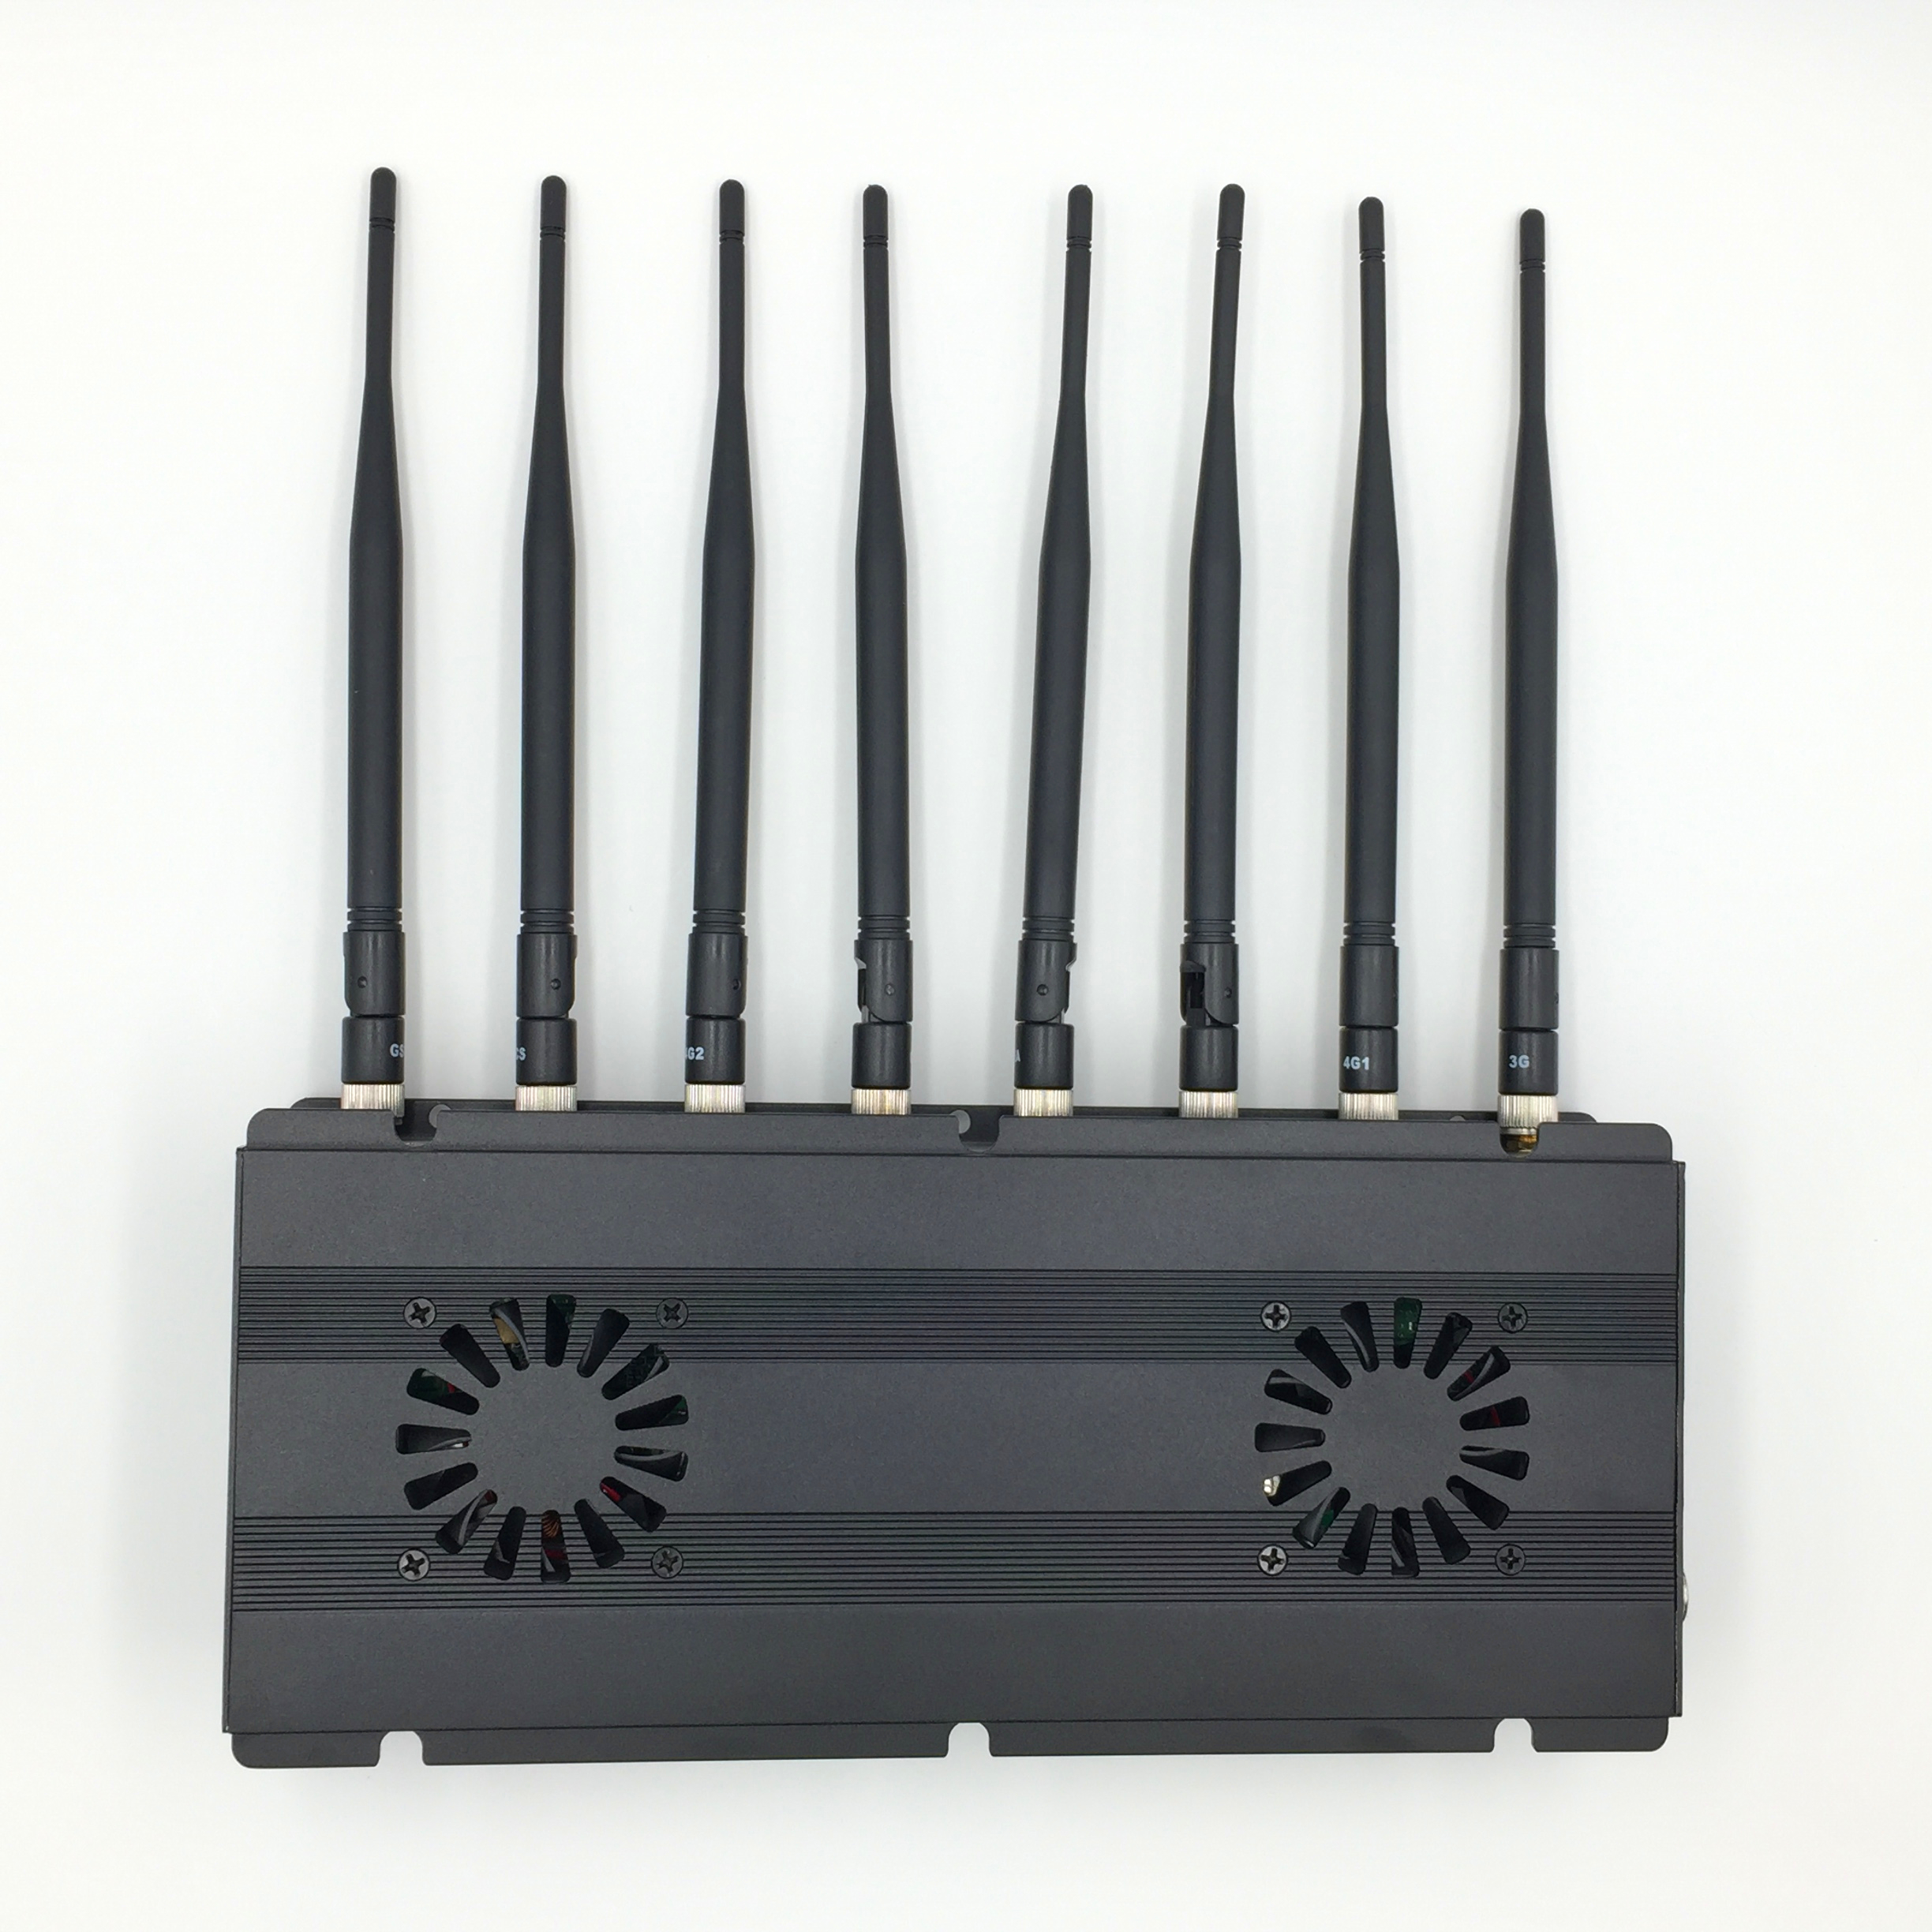 jammer legal office lackland | Black Desktop 8 Antenna Signal Jammers With GSM 3G 4G GPS WiFi LOJACK